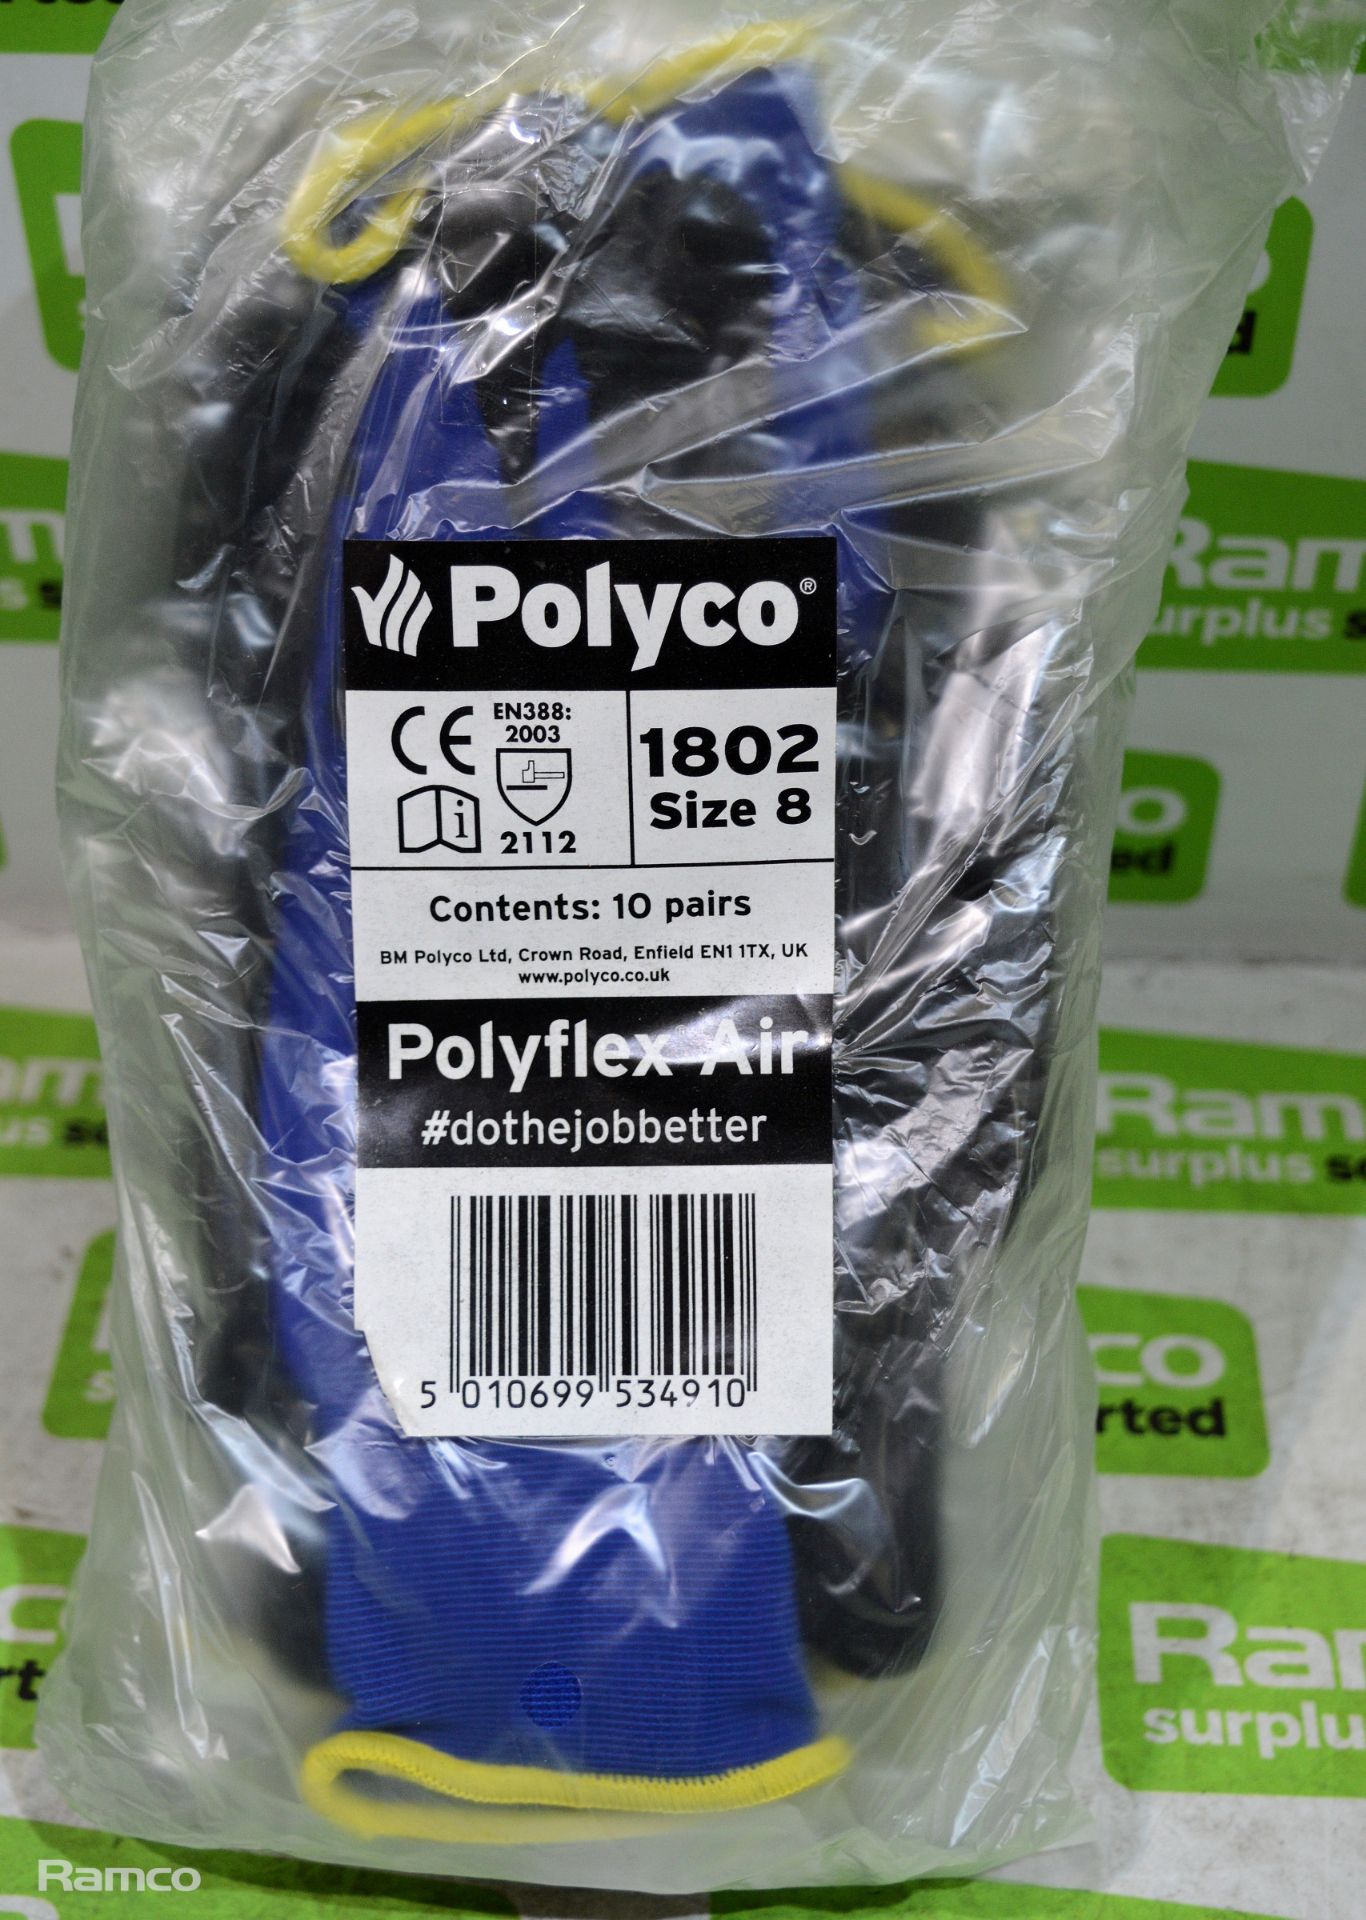 Polyco Polyflex size 8 gloves - 100 pairs - Image 2 of 3